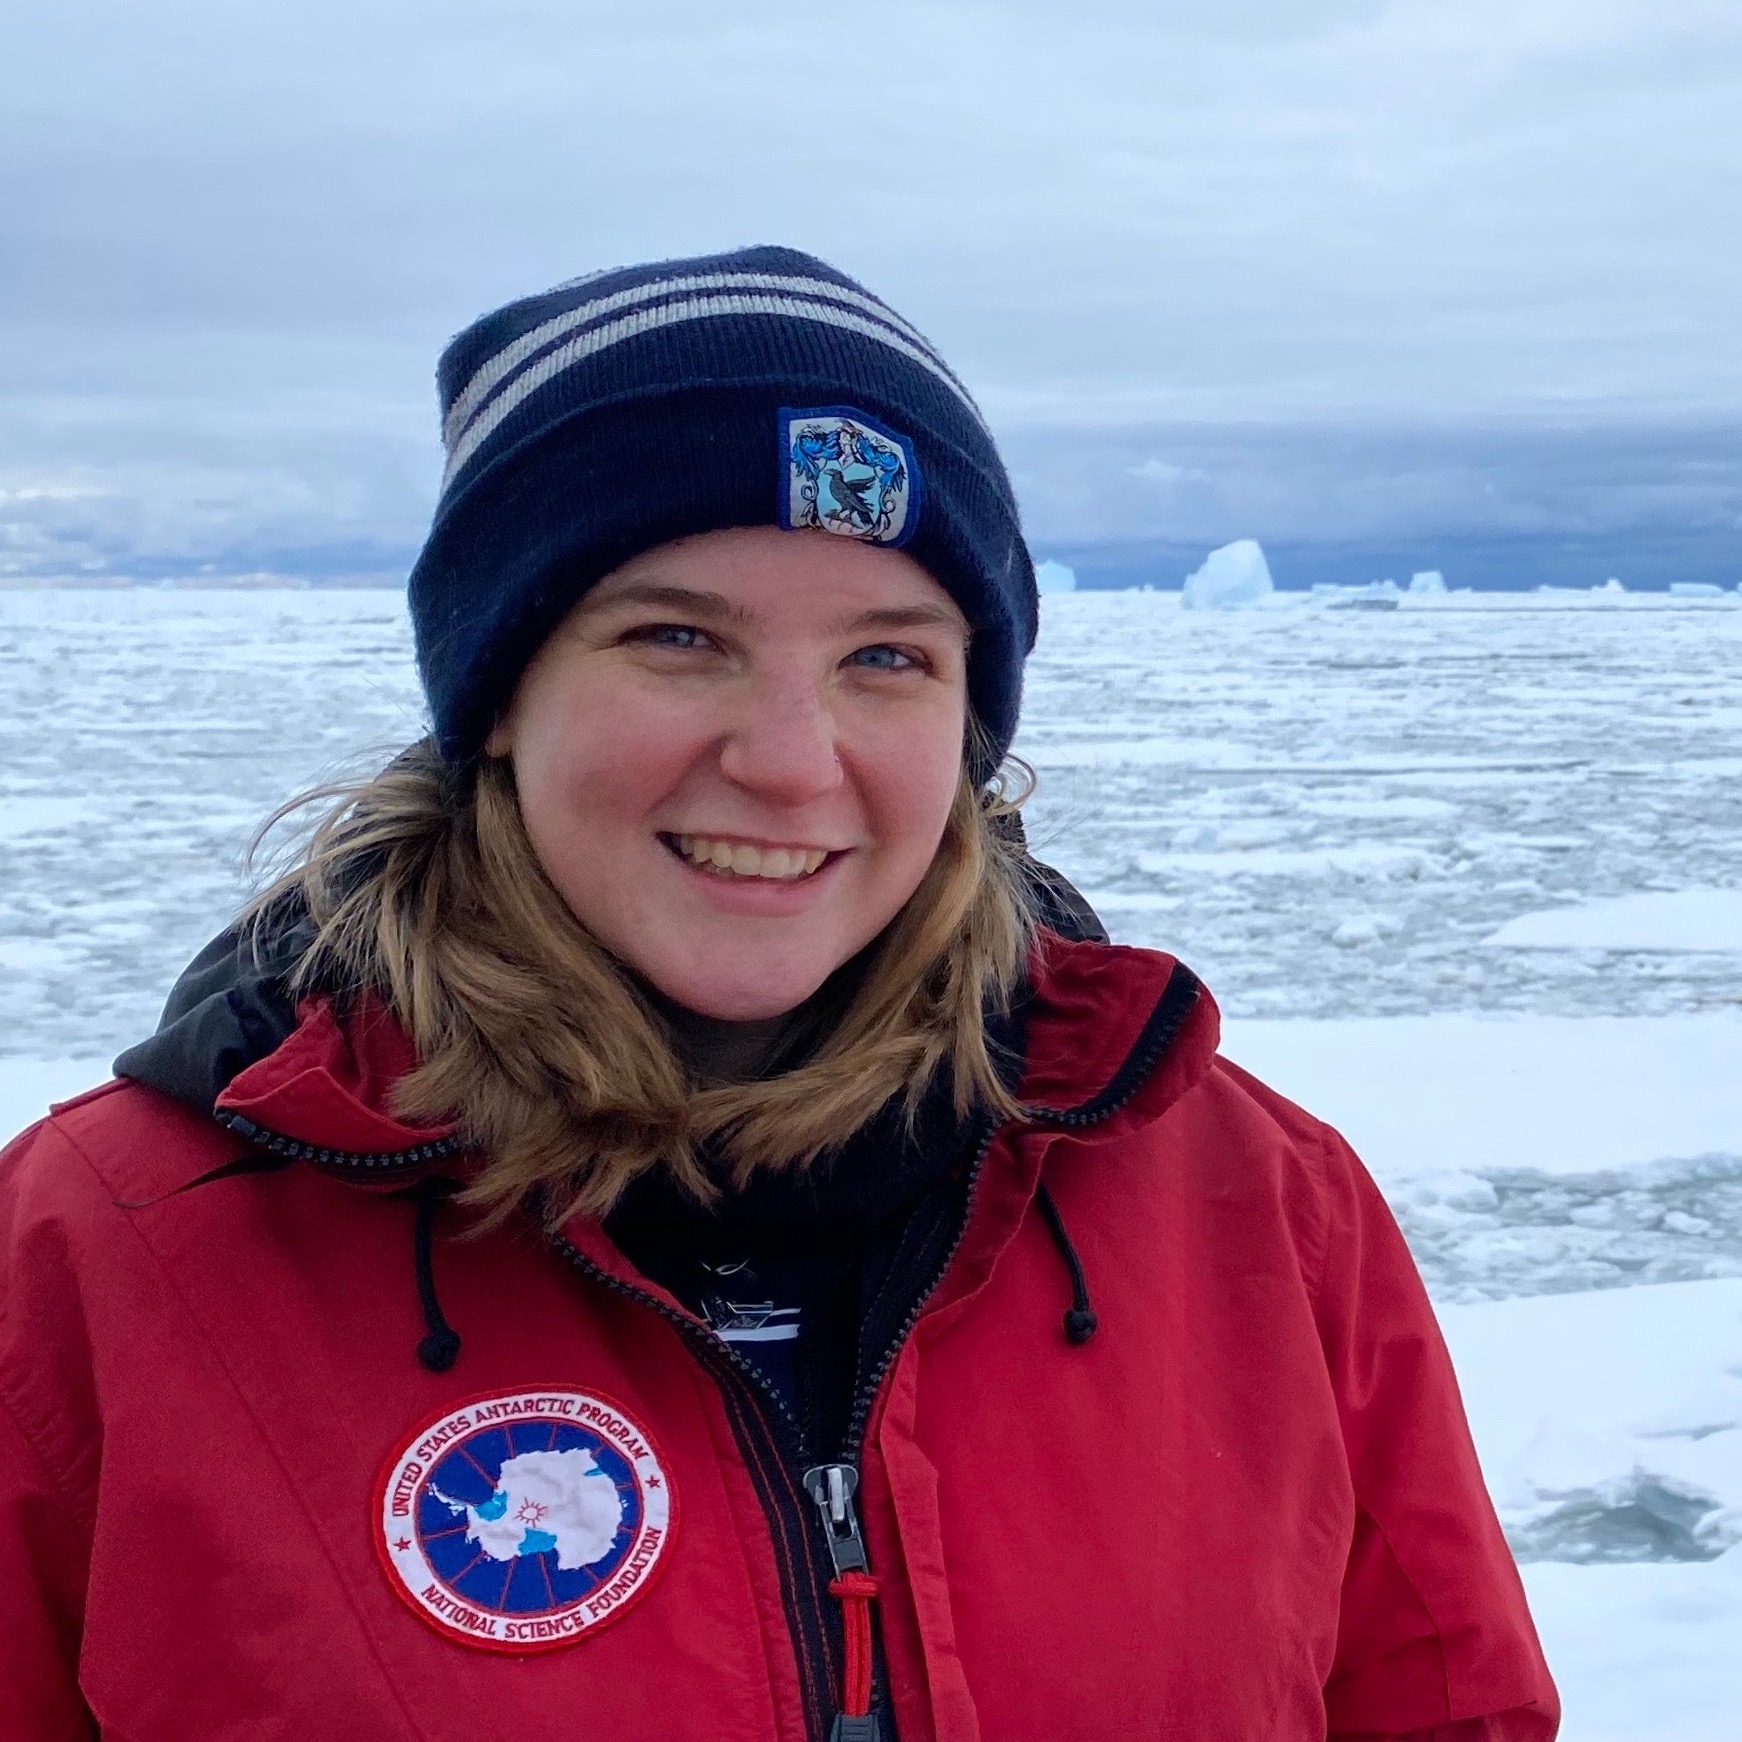 Picture of Lily Dove, a smiling person in front of sea ice